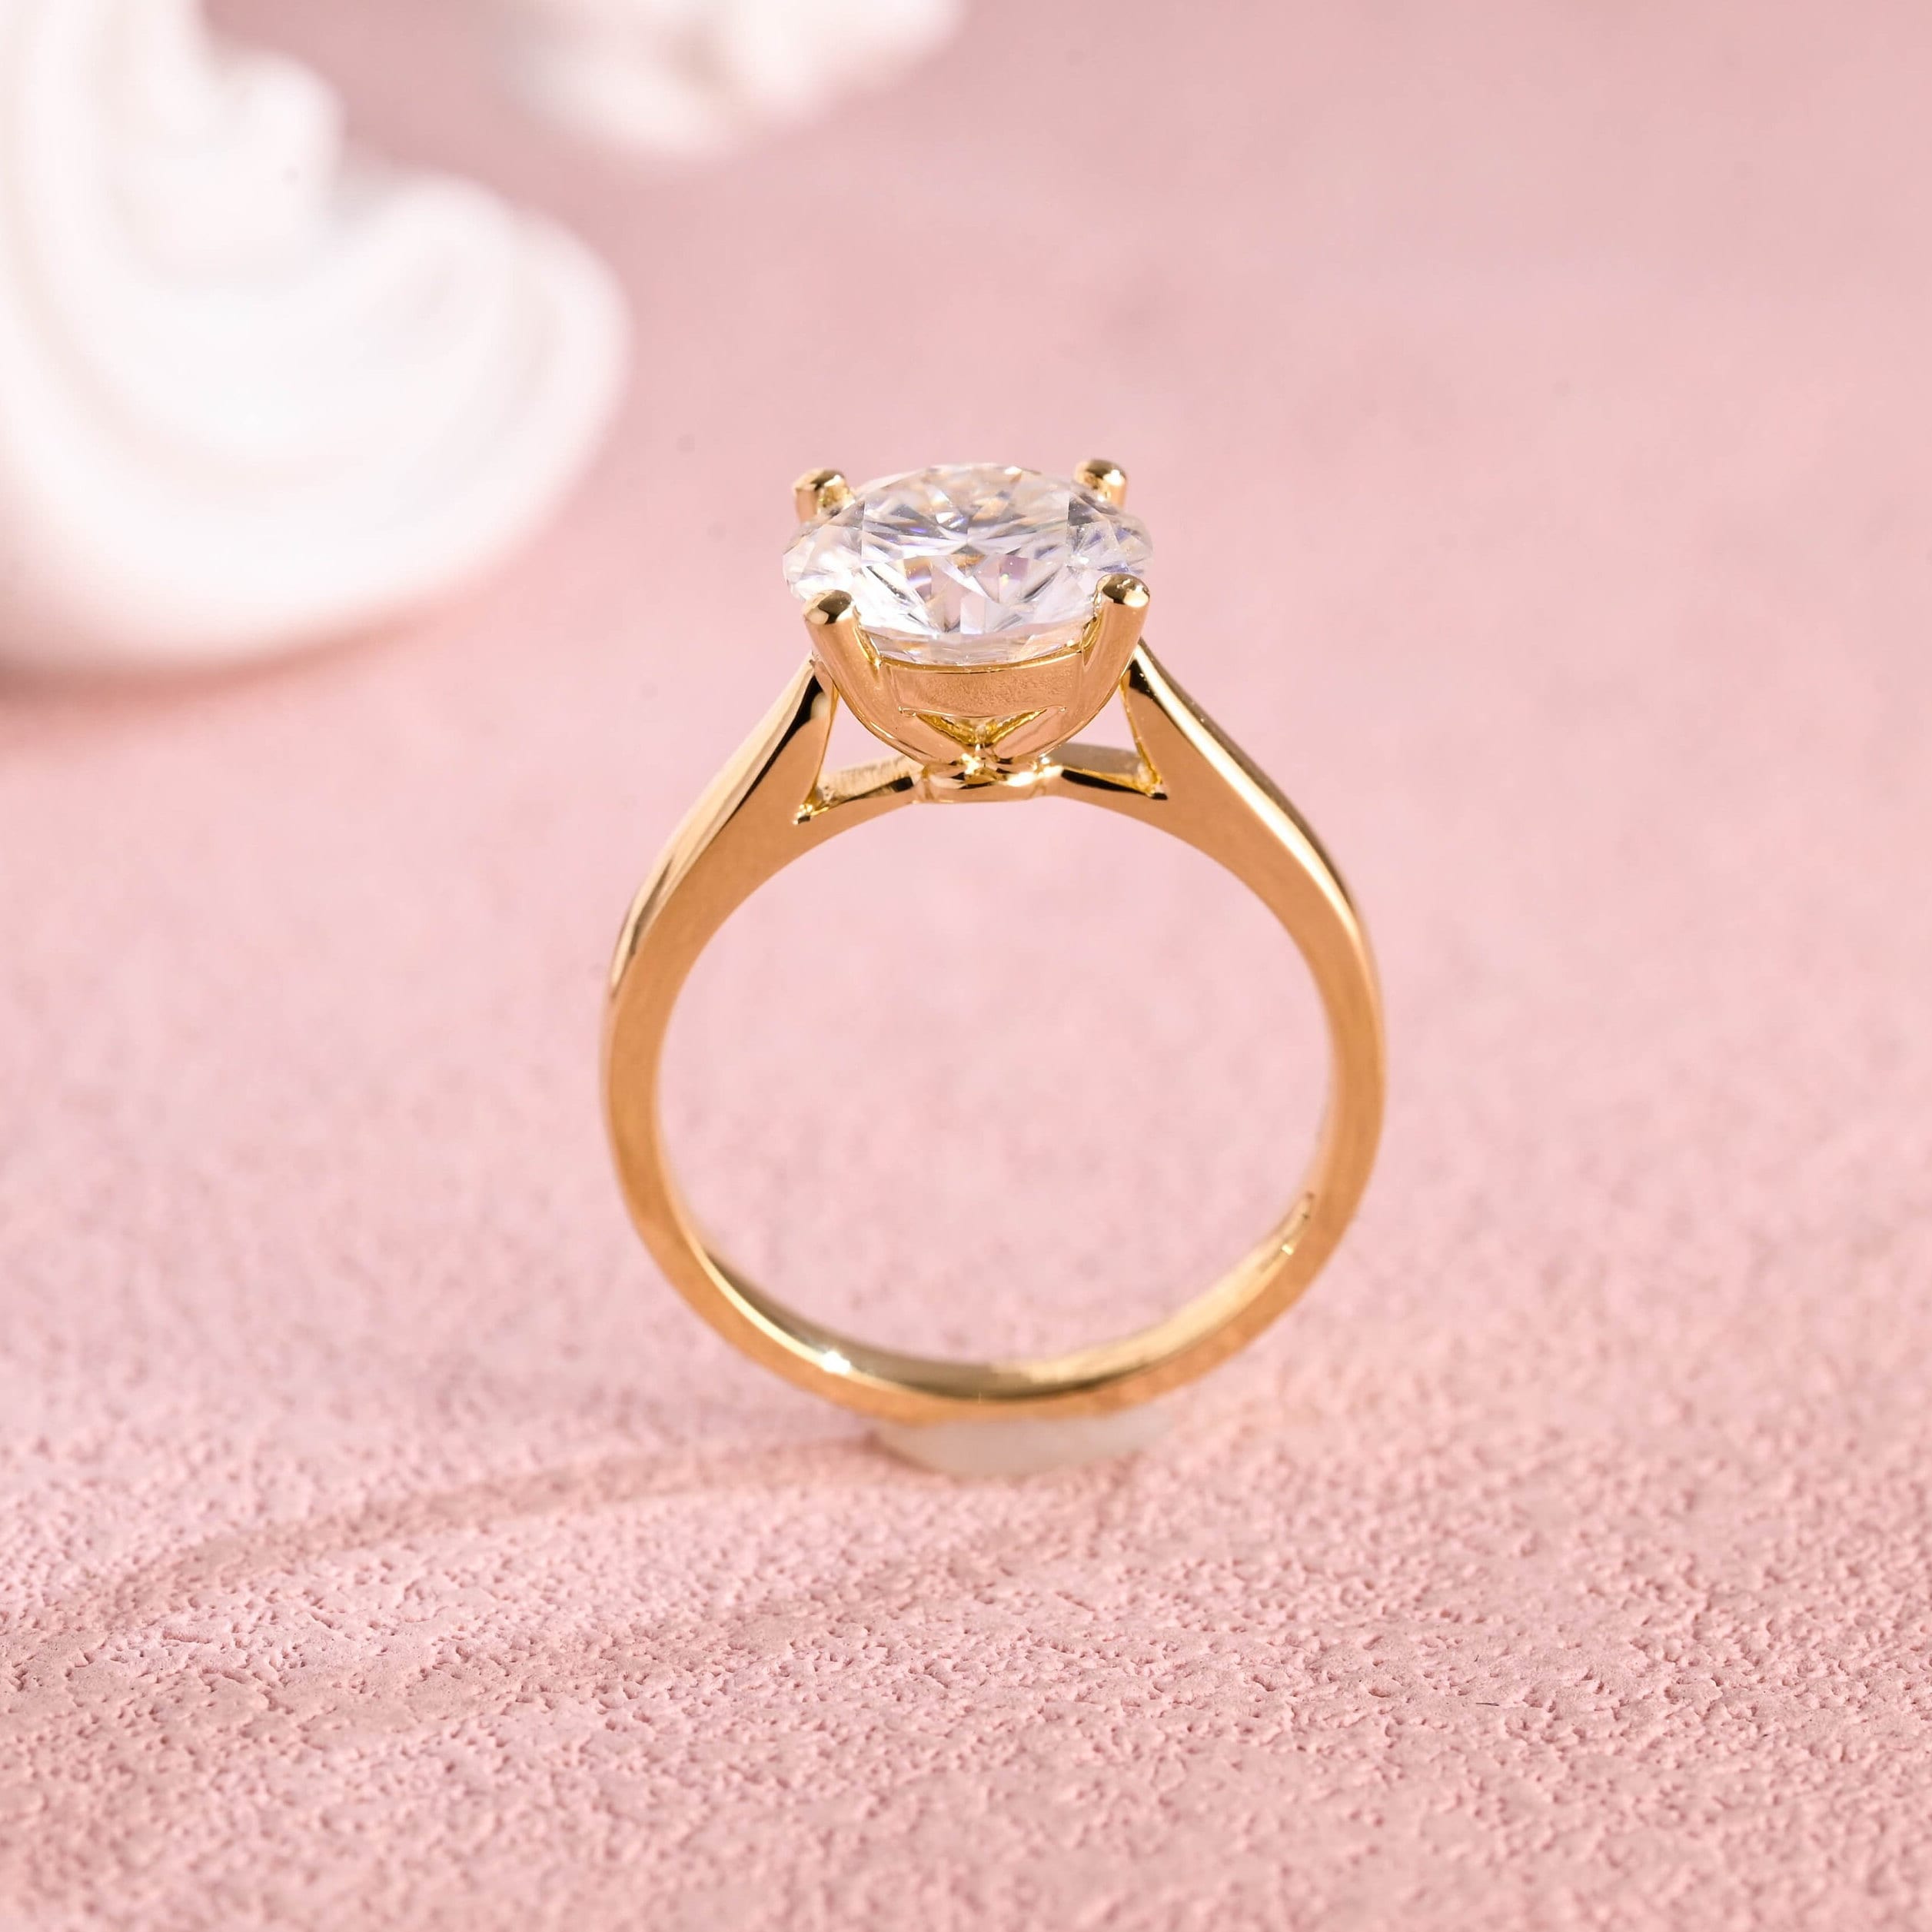 Custom Engagement Ring Setting 14K Gold Semi Mount Setting Only No Stone Custom Fit Any Shape, Plain Band Simple Solitaire Ring Setting